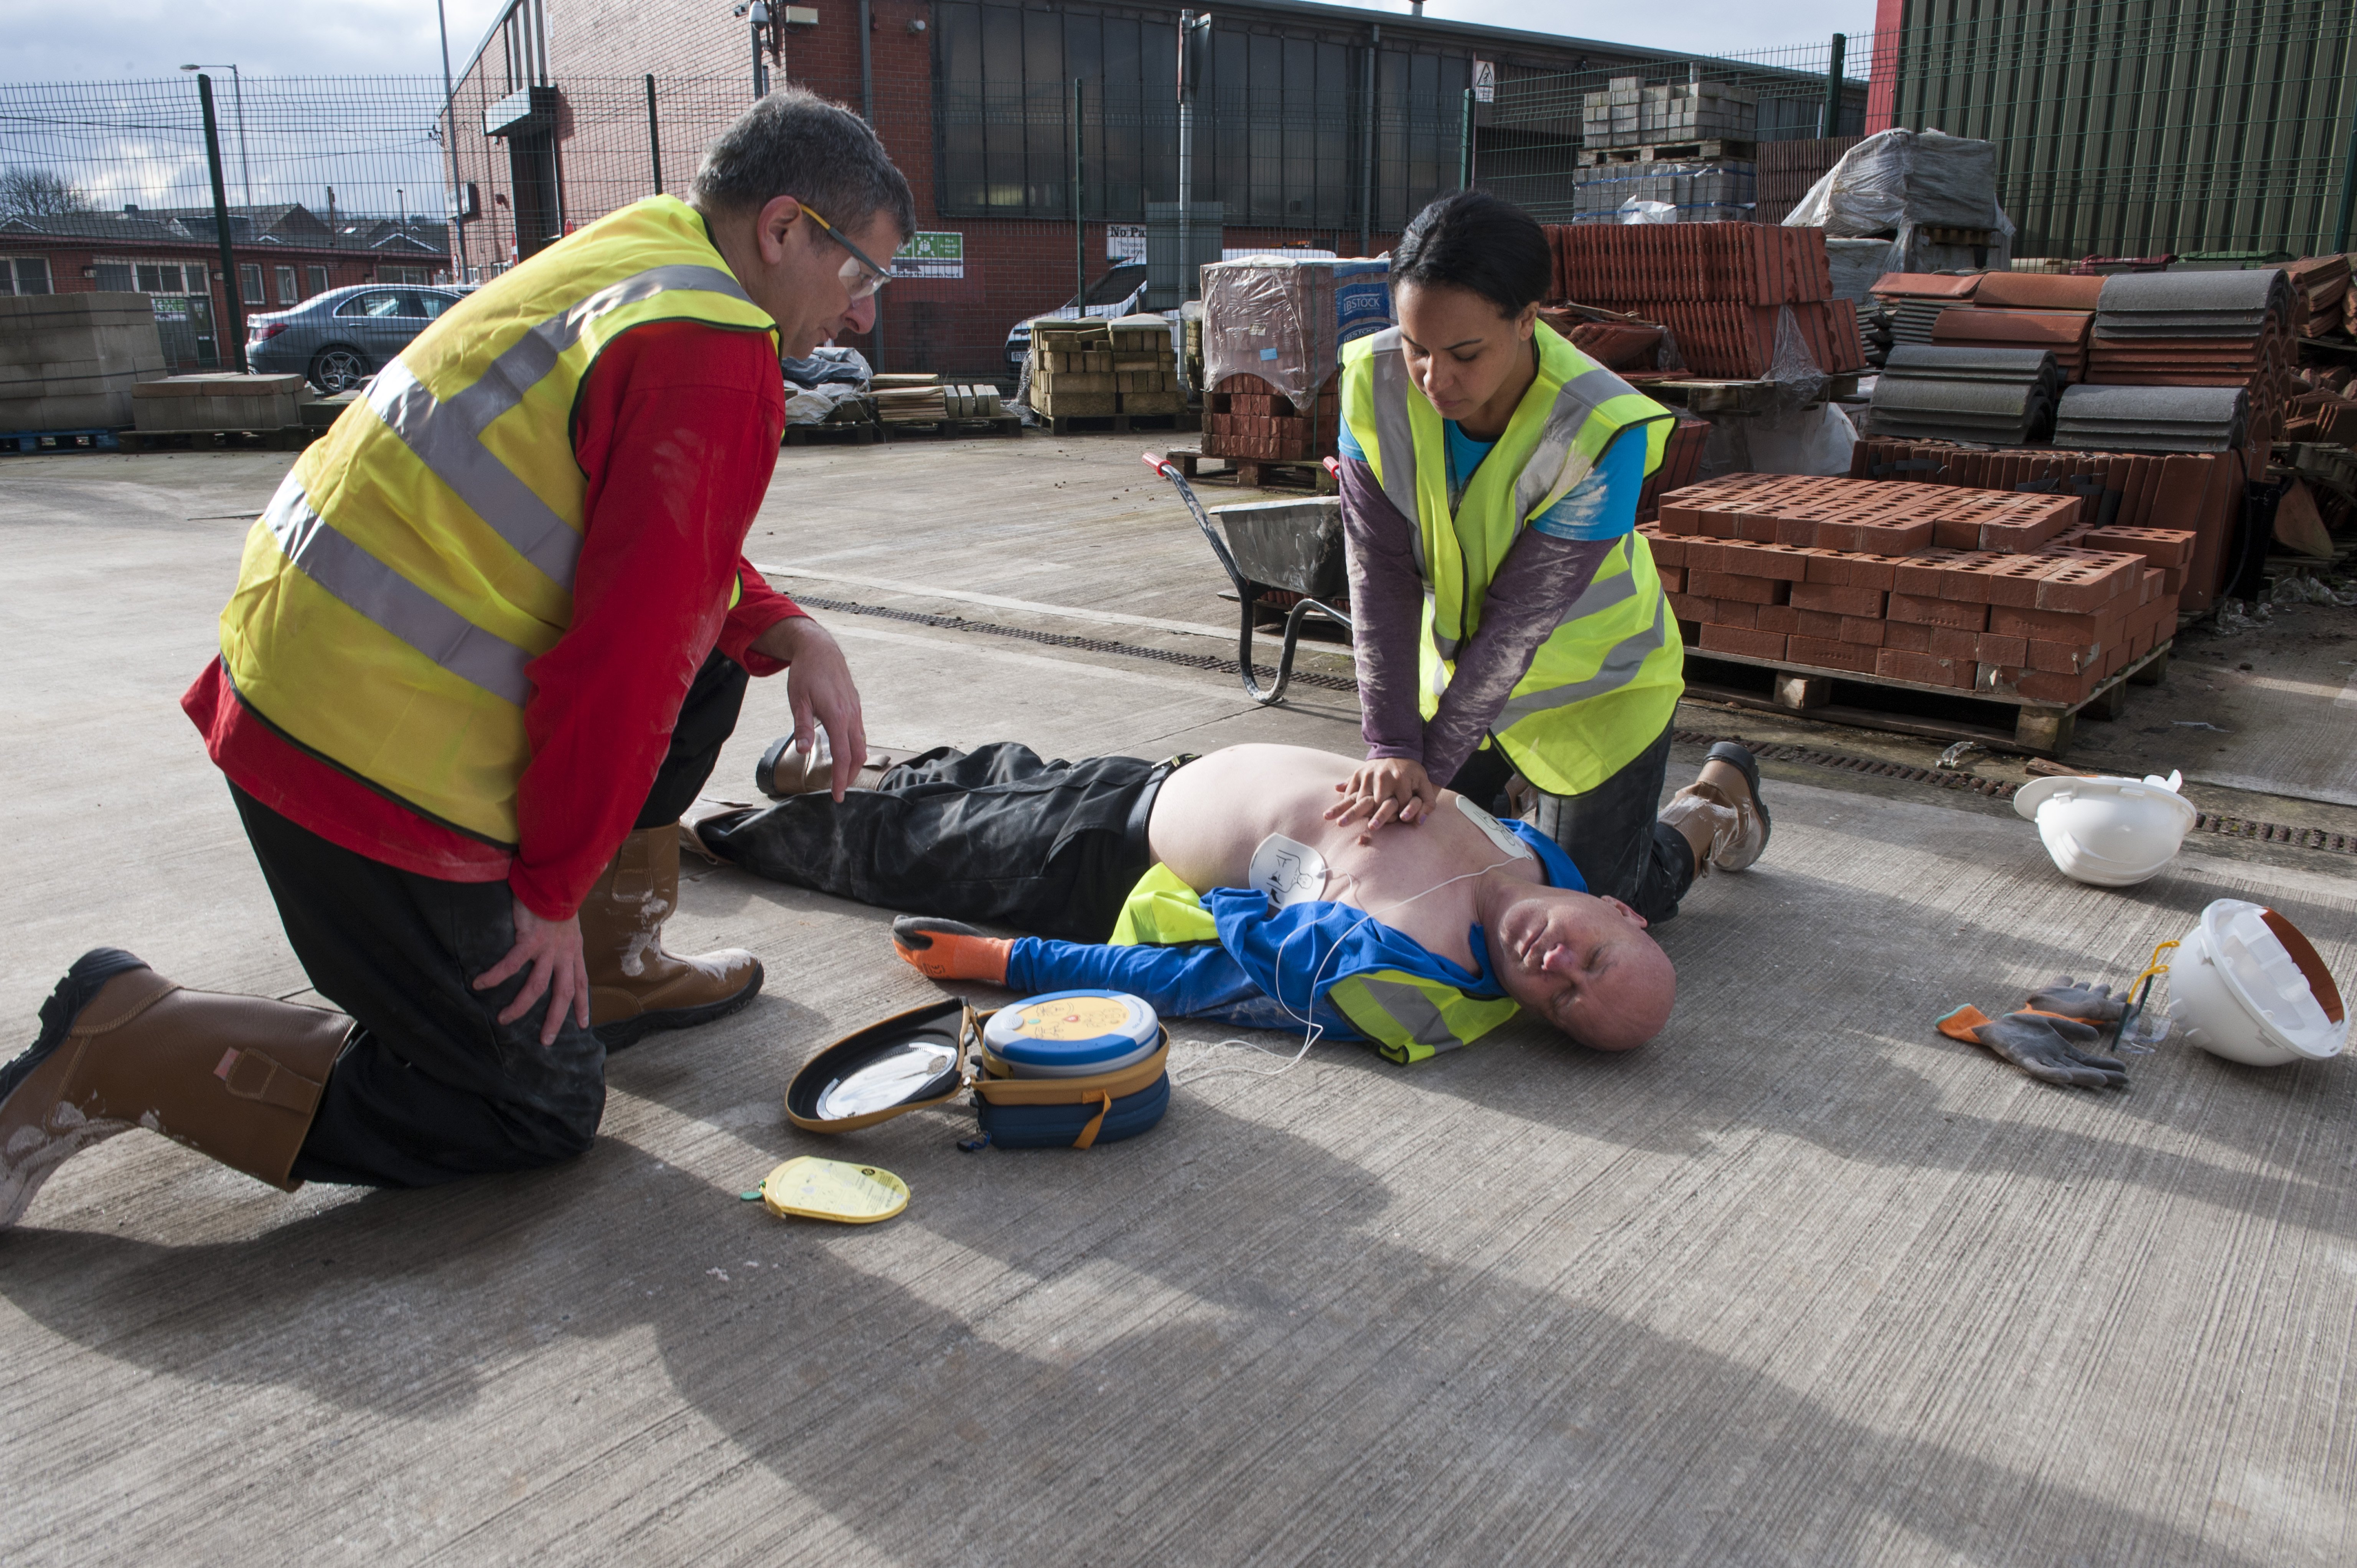 How to ensure a quick first aid response that requires CPR and AED